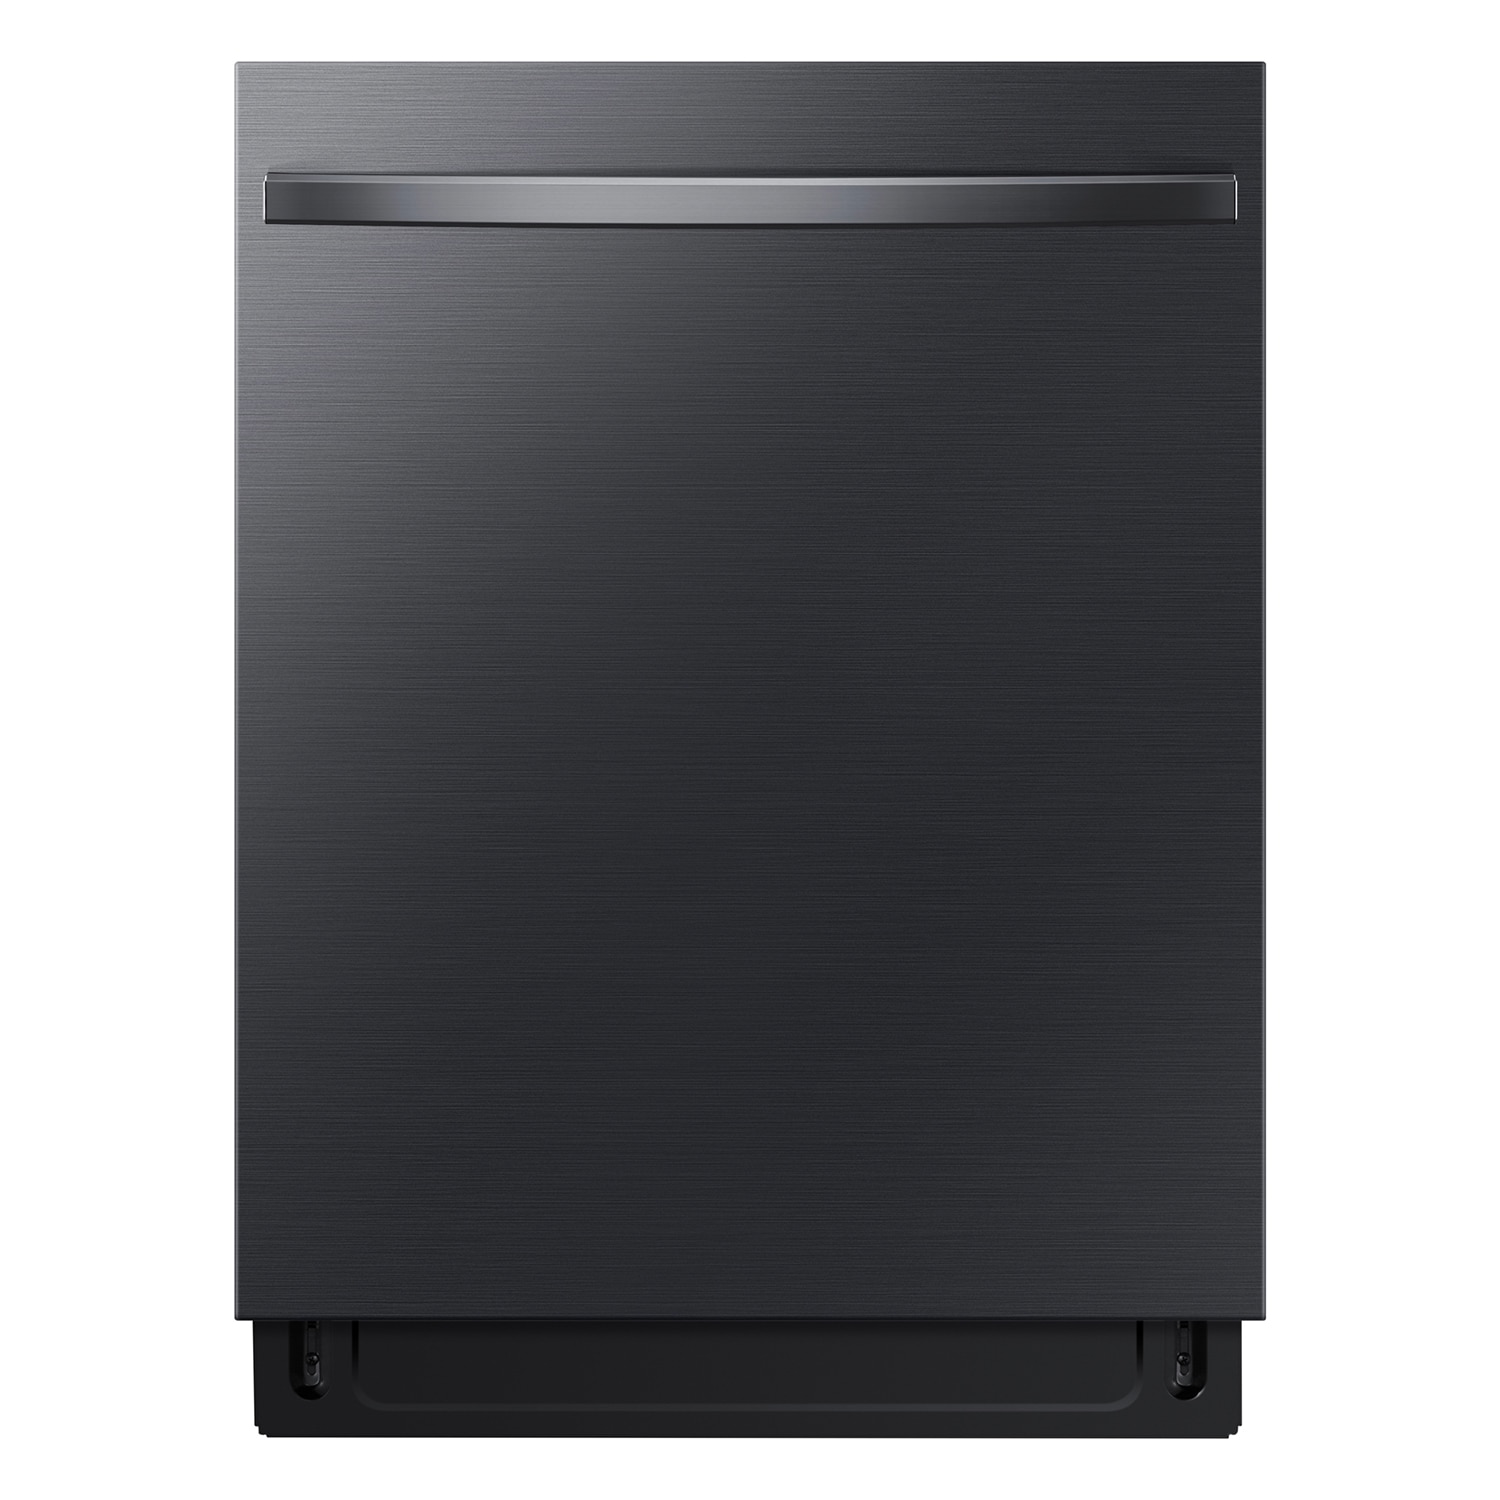 Samsung 18 in. Built-In Dishwasher with Top Control, 46 dBA Sound